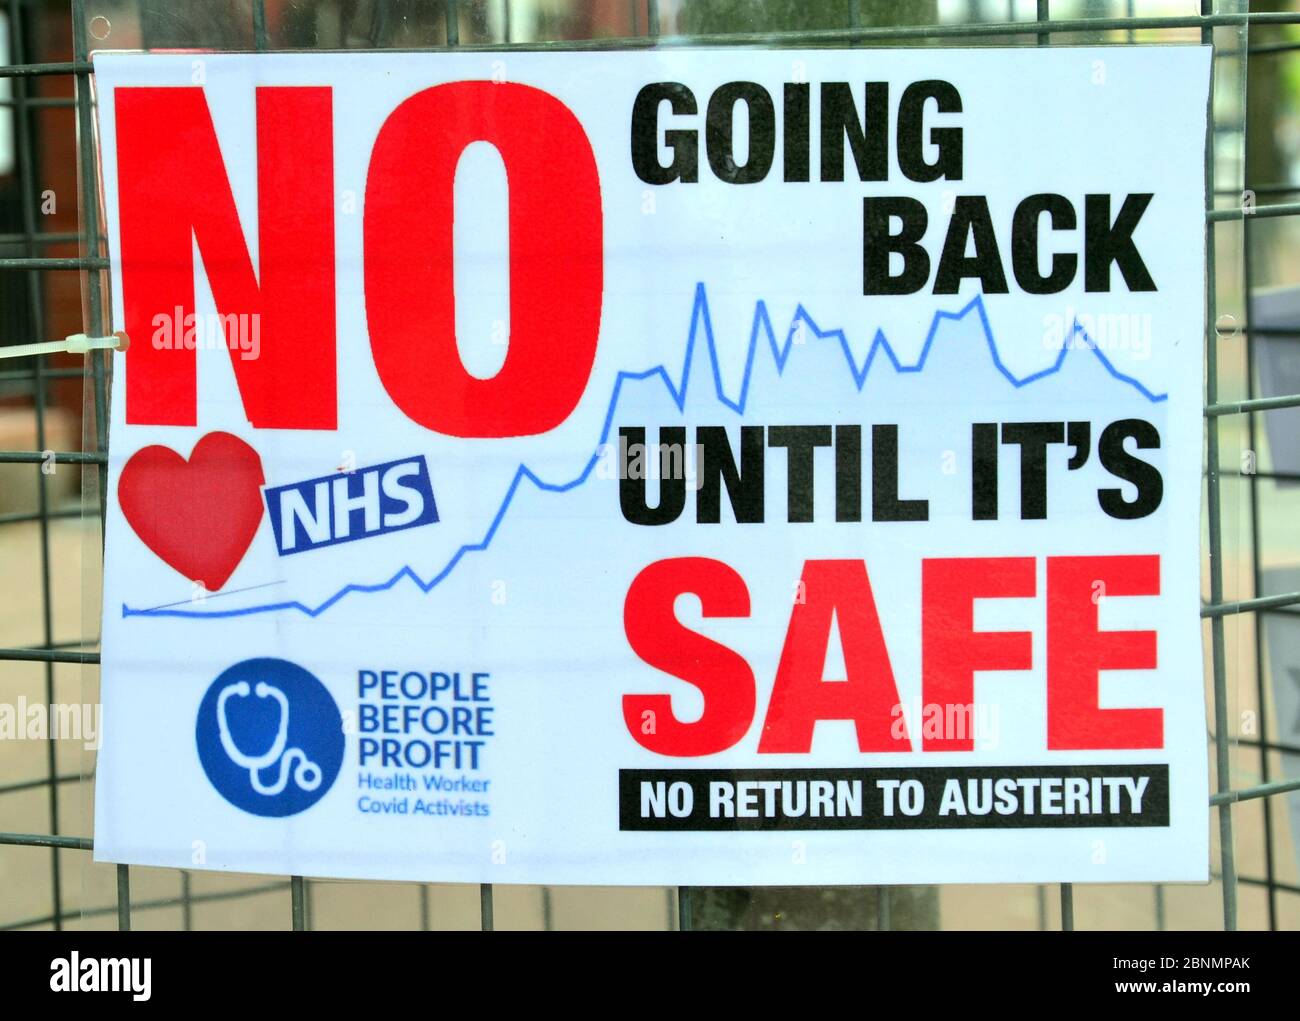 A poster in a street in Manchester, England, United Kingdom, May 15, 2020, calls for not going back to work until it's safe in the context of the Coronavirus or Covid 19 global pandemic. The poster includes the love NHS symbol, a 'people before profit' tag, and for 'no return to austerity'. Stock Photo